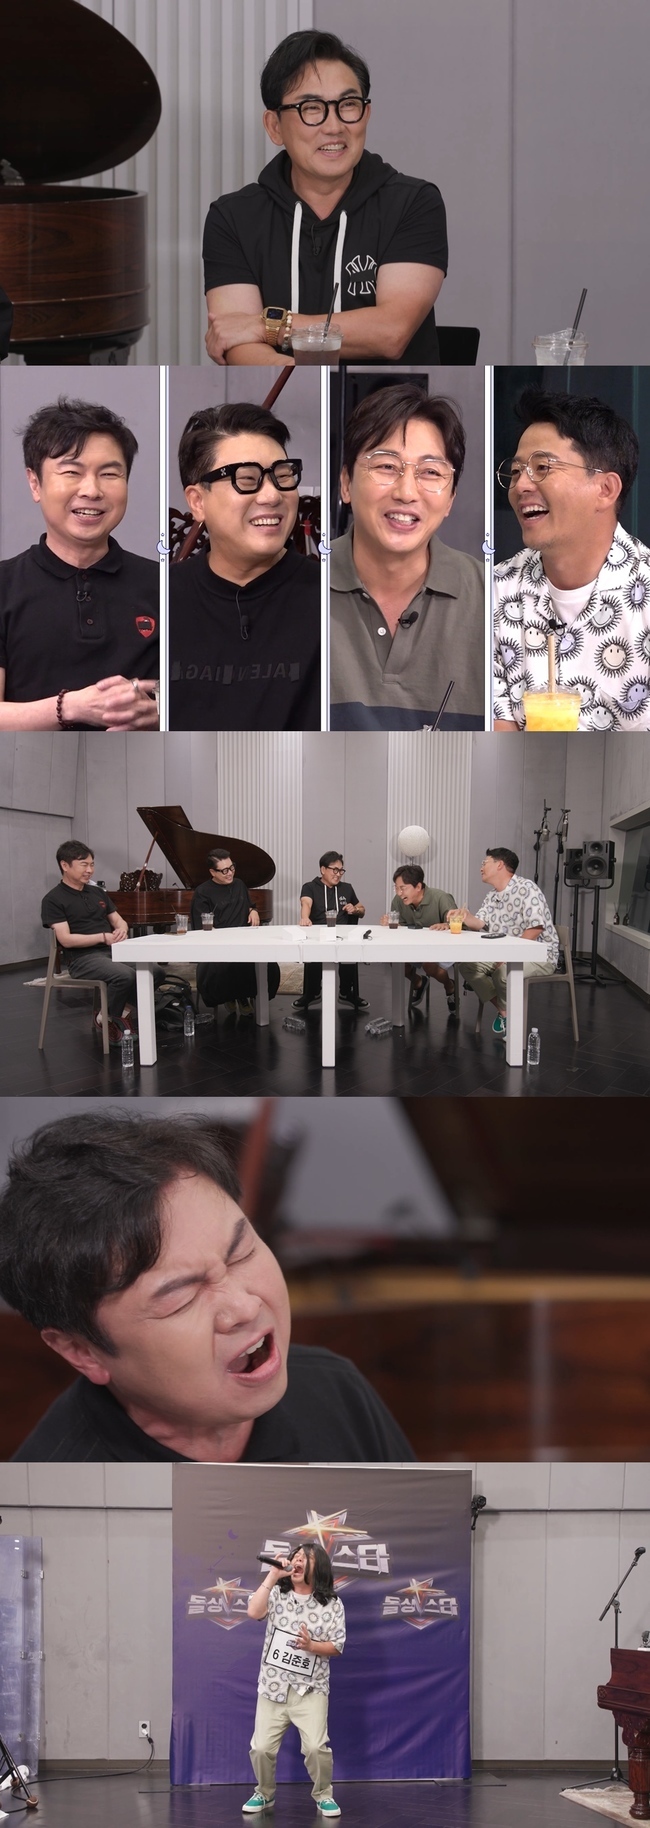 Lee Seung-cheol raises Kim Jun-hos suspicion of separation (?)On June 6, SBS  ⁇  Take off your shoes and dolsing foreman  ⁇ , followed by last weeks music legend Lee Seung-cheol,  ⁇  Dollsing4men  ⁇  and  ⁇   ⁇   ⁇   ⁇   ⁇   ⁇   ⁇   ⁇ .On this day,  ⁇ Dollsing4men ⁇  visited the recording studio to learn the song from King Lee Seung-cheol.Im Won-hee sang Lee Seung-cheols famous song  ⁇   ⁇   ⁇   ⁇   ⁇   ⁇   ⁇   ⁇ , but he could not stop laughing at his imaginative singing ability.Lee Seung-cheol, who could not hear it, had to stop the song and there was tension in the scene.After a while, Lee Seung-cheol showed his magic touch that he could be perfect if he could do it, and Im Won-hees singing ability changed 180 degrees and surprised everyone.